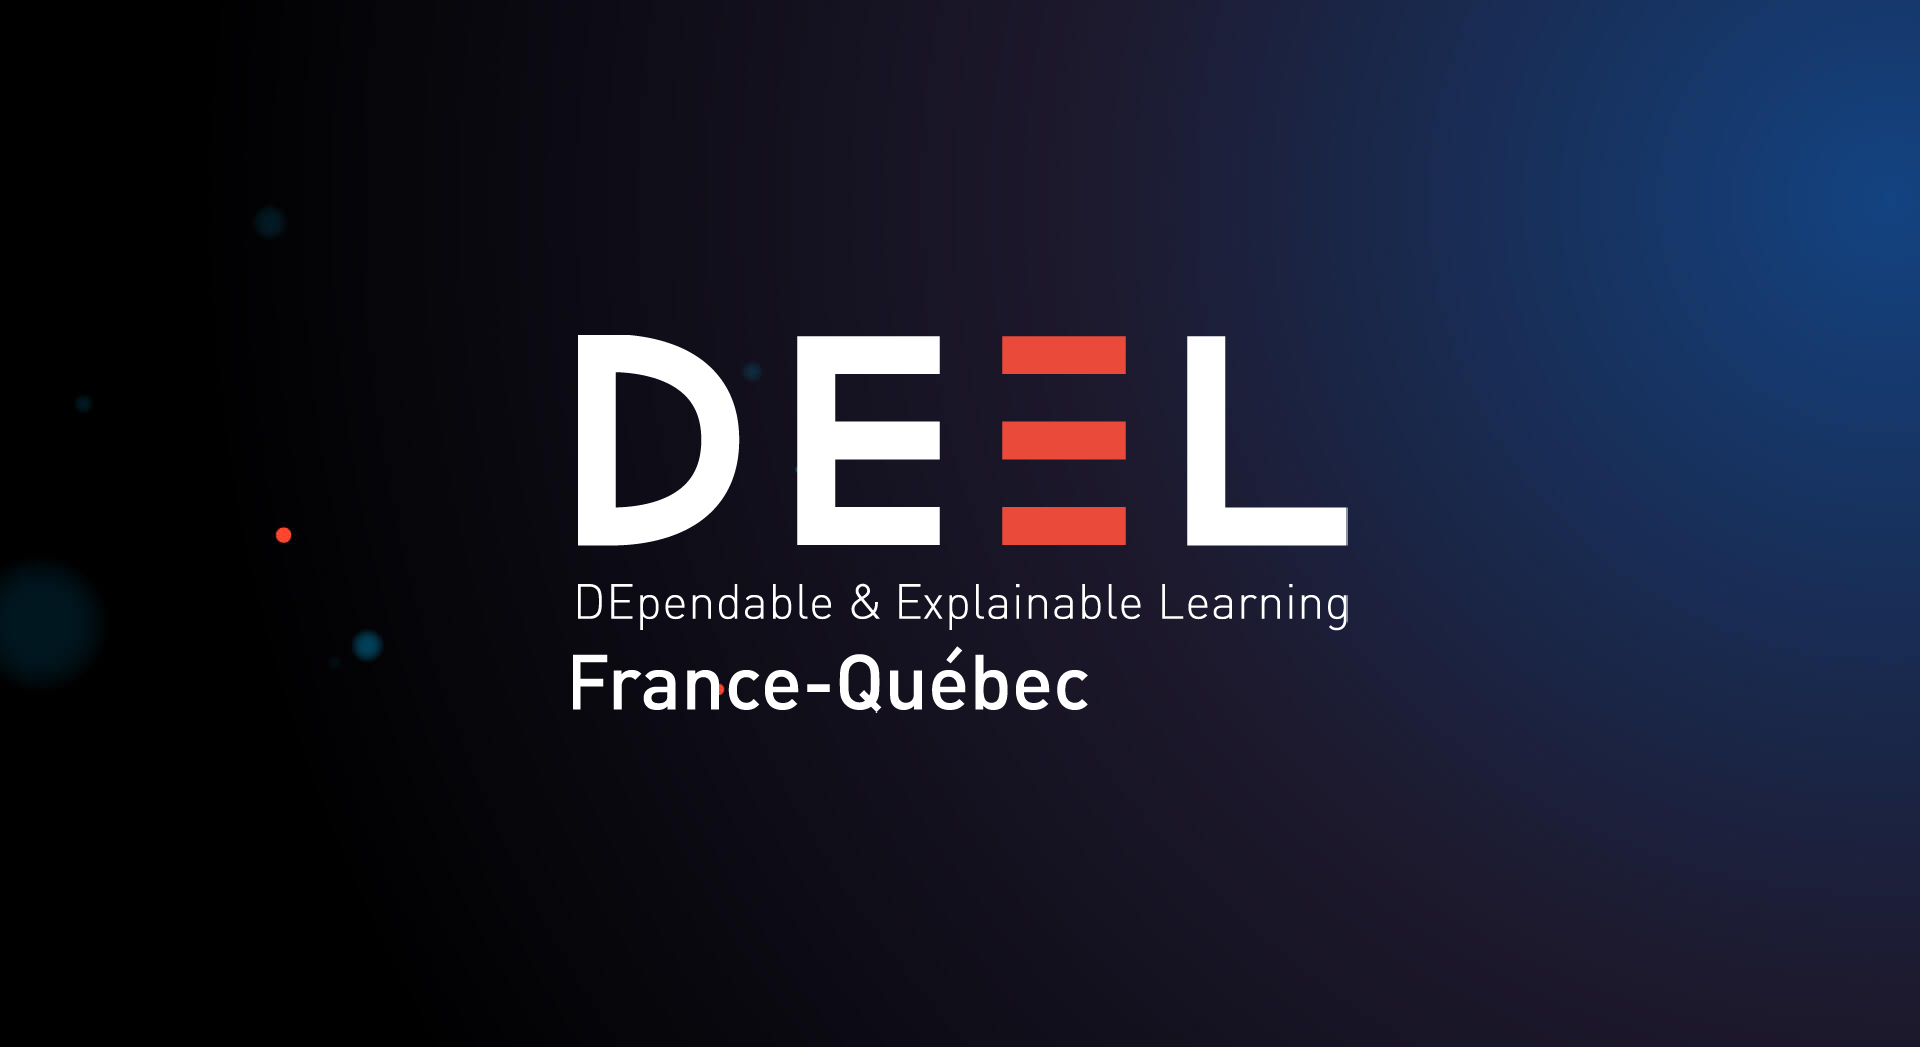 DEEL: The Robust and Explainable Artificial Intelligence Program Enters Phase 2